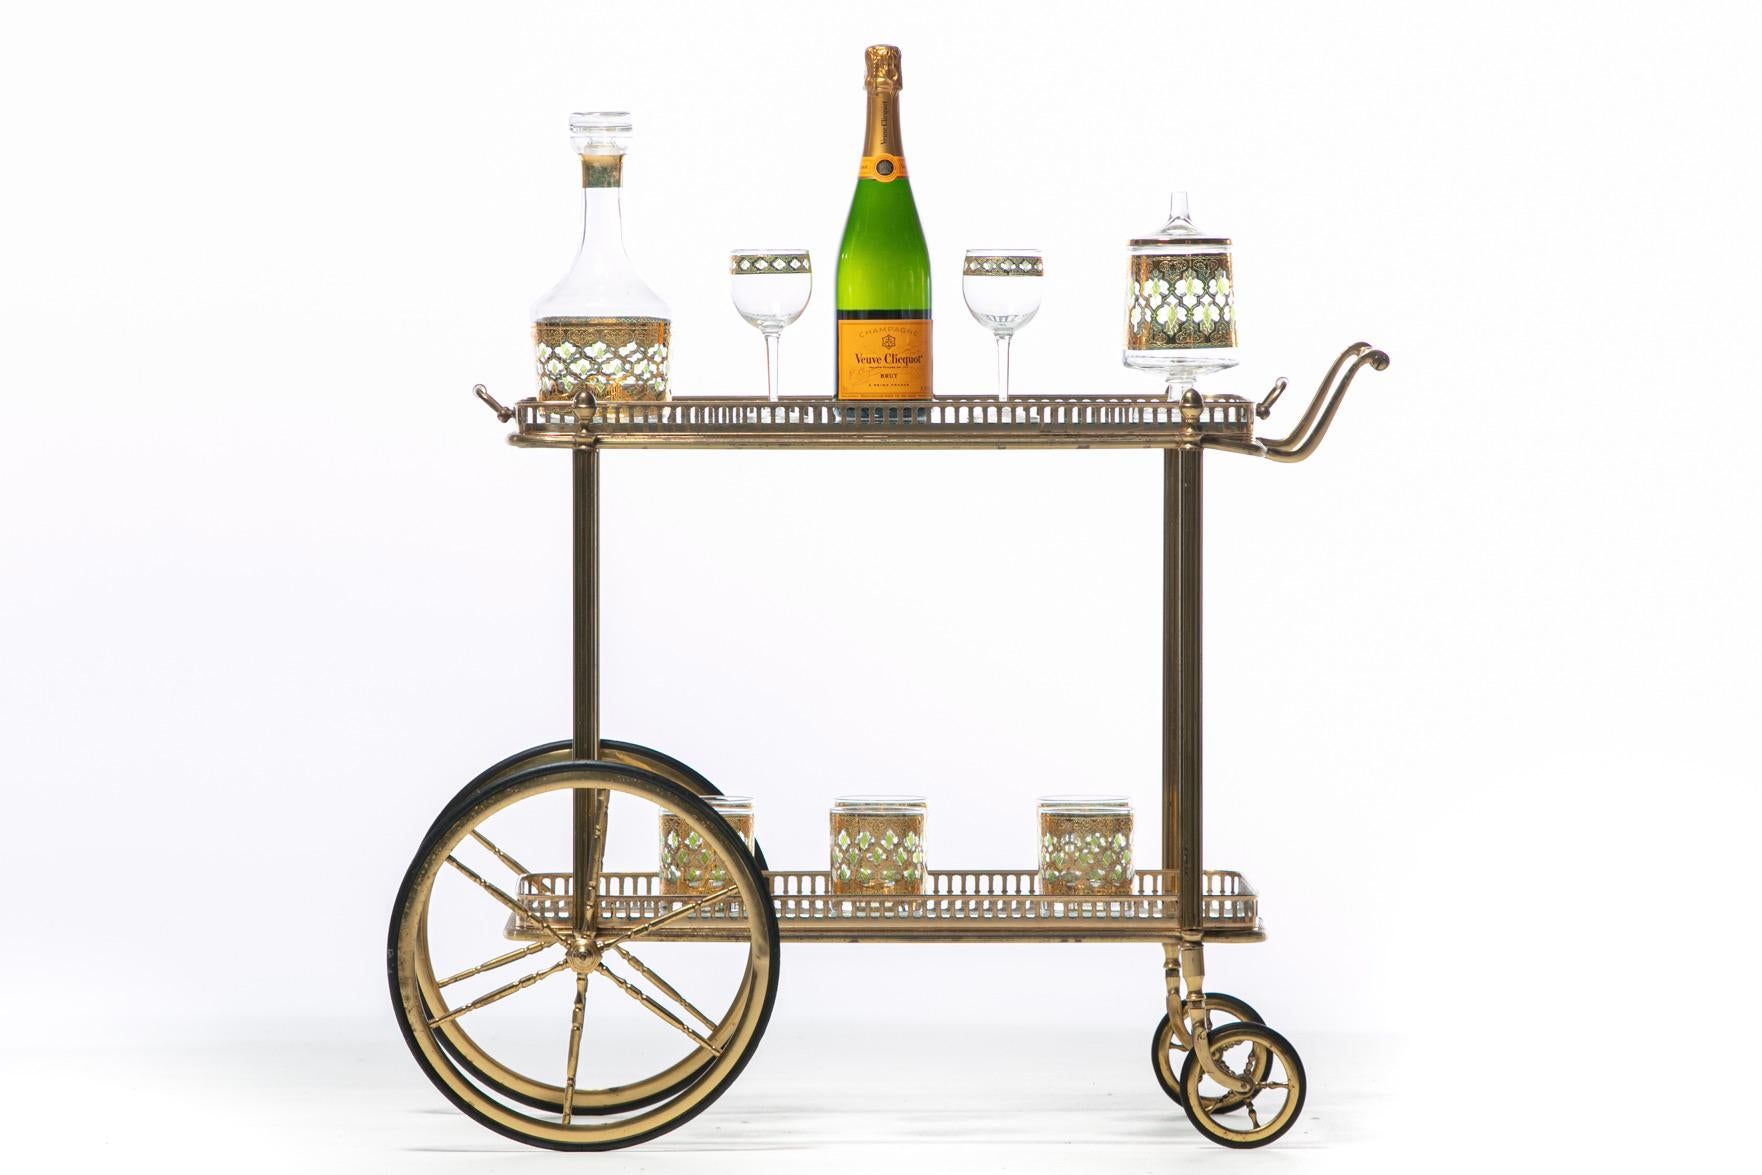 Roll into cocktail hour in style with this chic French neoclassical brass bar cart in the style of Maison Bagués. The details. Two tiers both with glass shelves surrounded by pierced brass galleries. Empirical Roman inspired leg detail. Wheel spoke